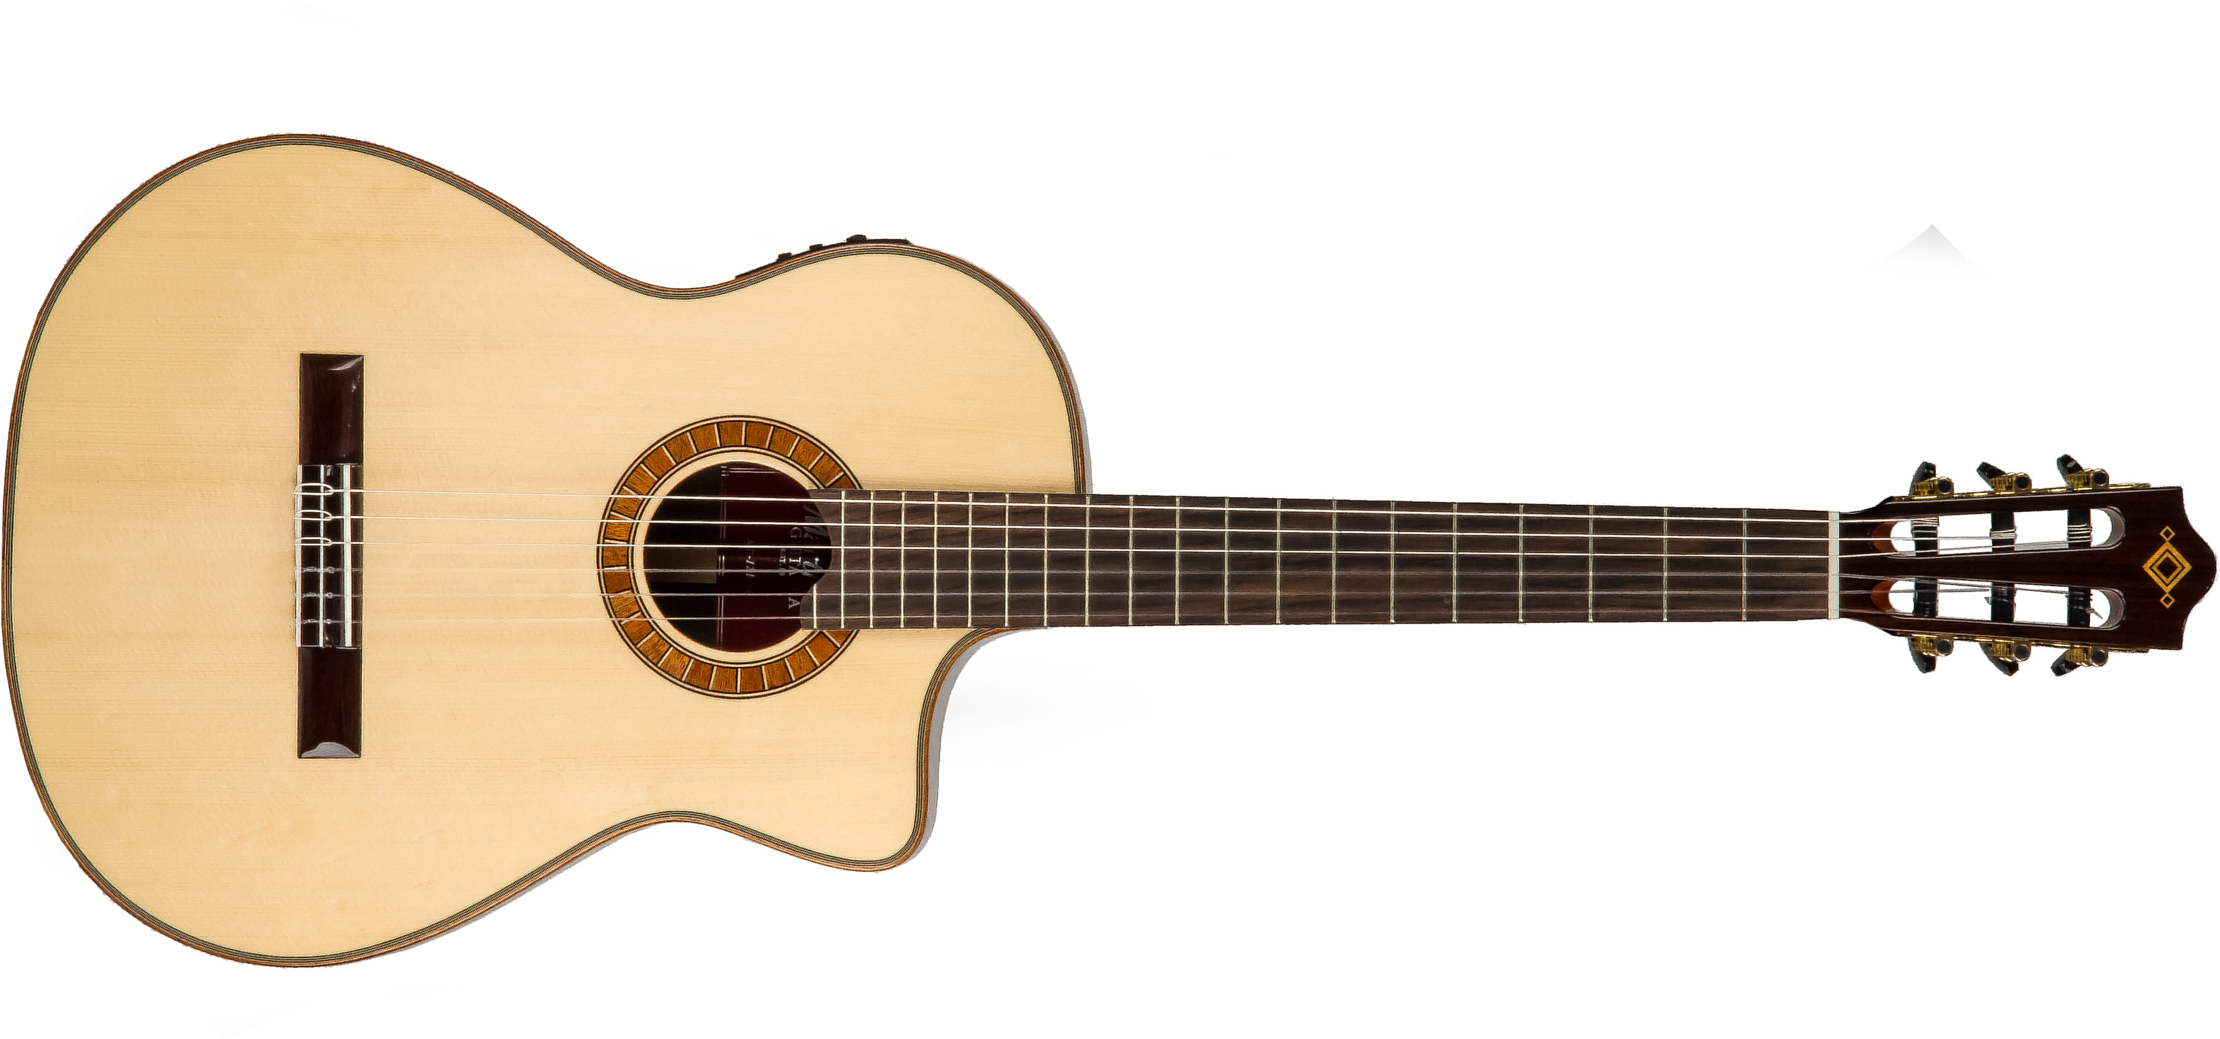 Martinez Mp12-rs Crossover Cw Epicea Palissandre Rw +housse - Natural - Classical guitar 4/4 size - Main picture